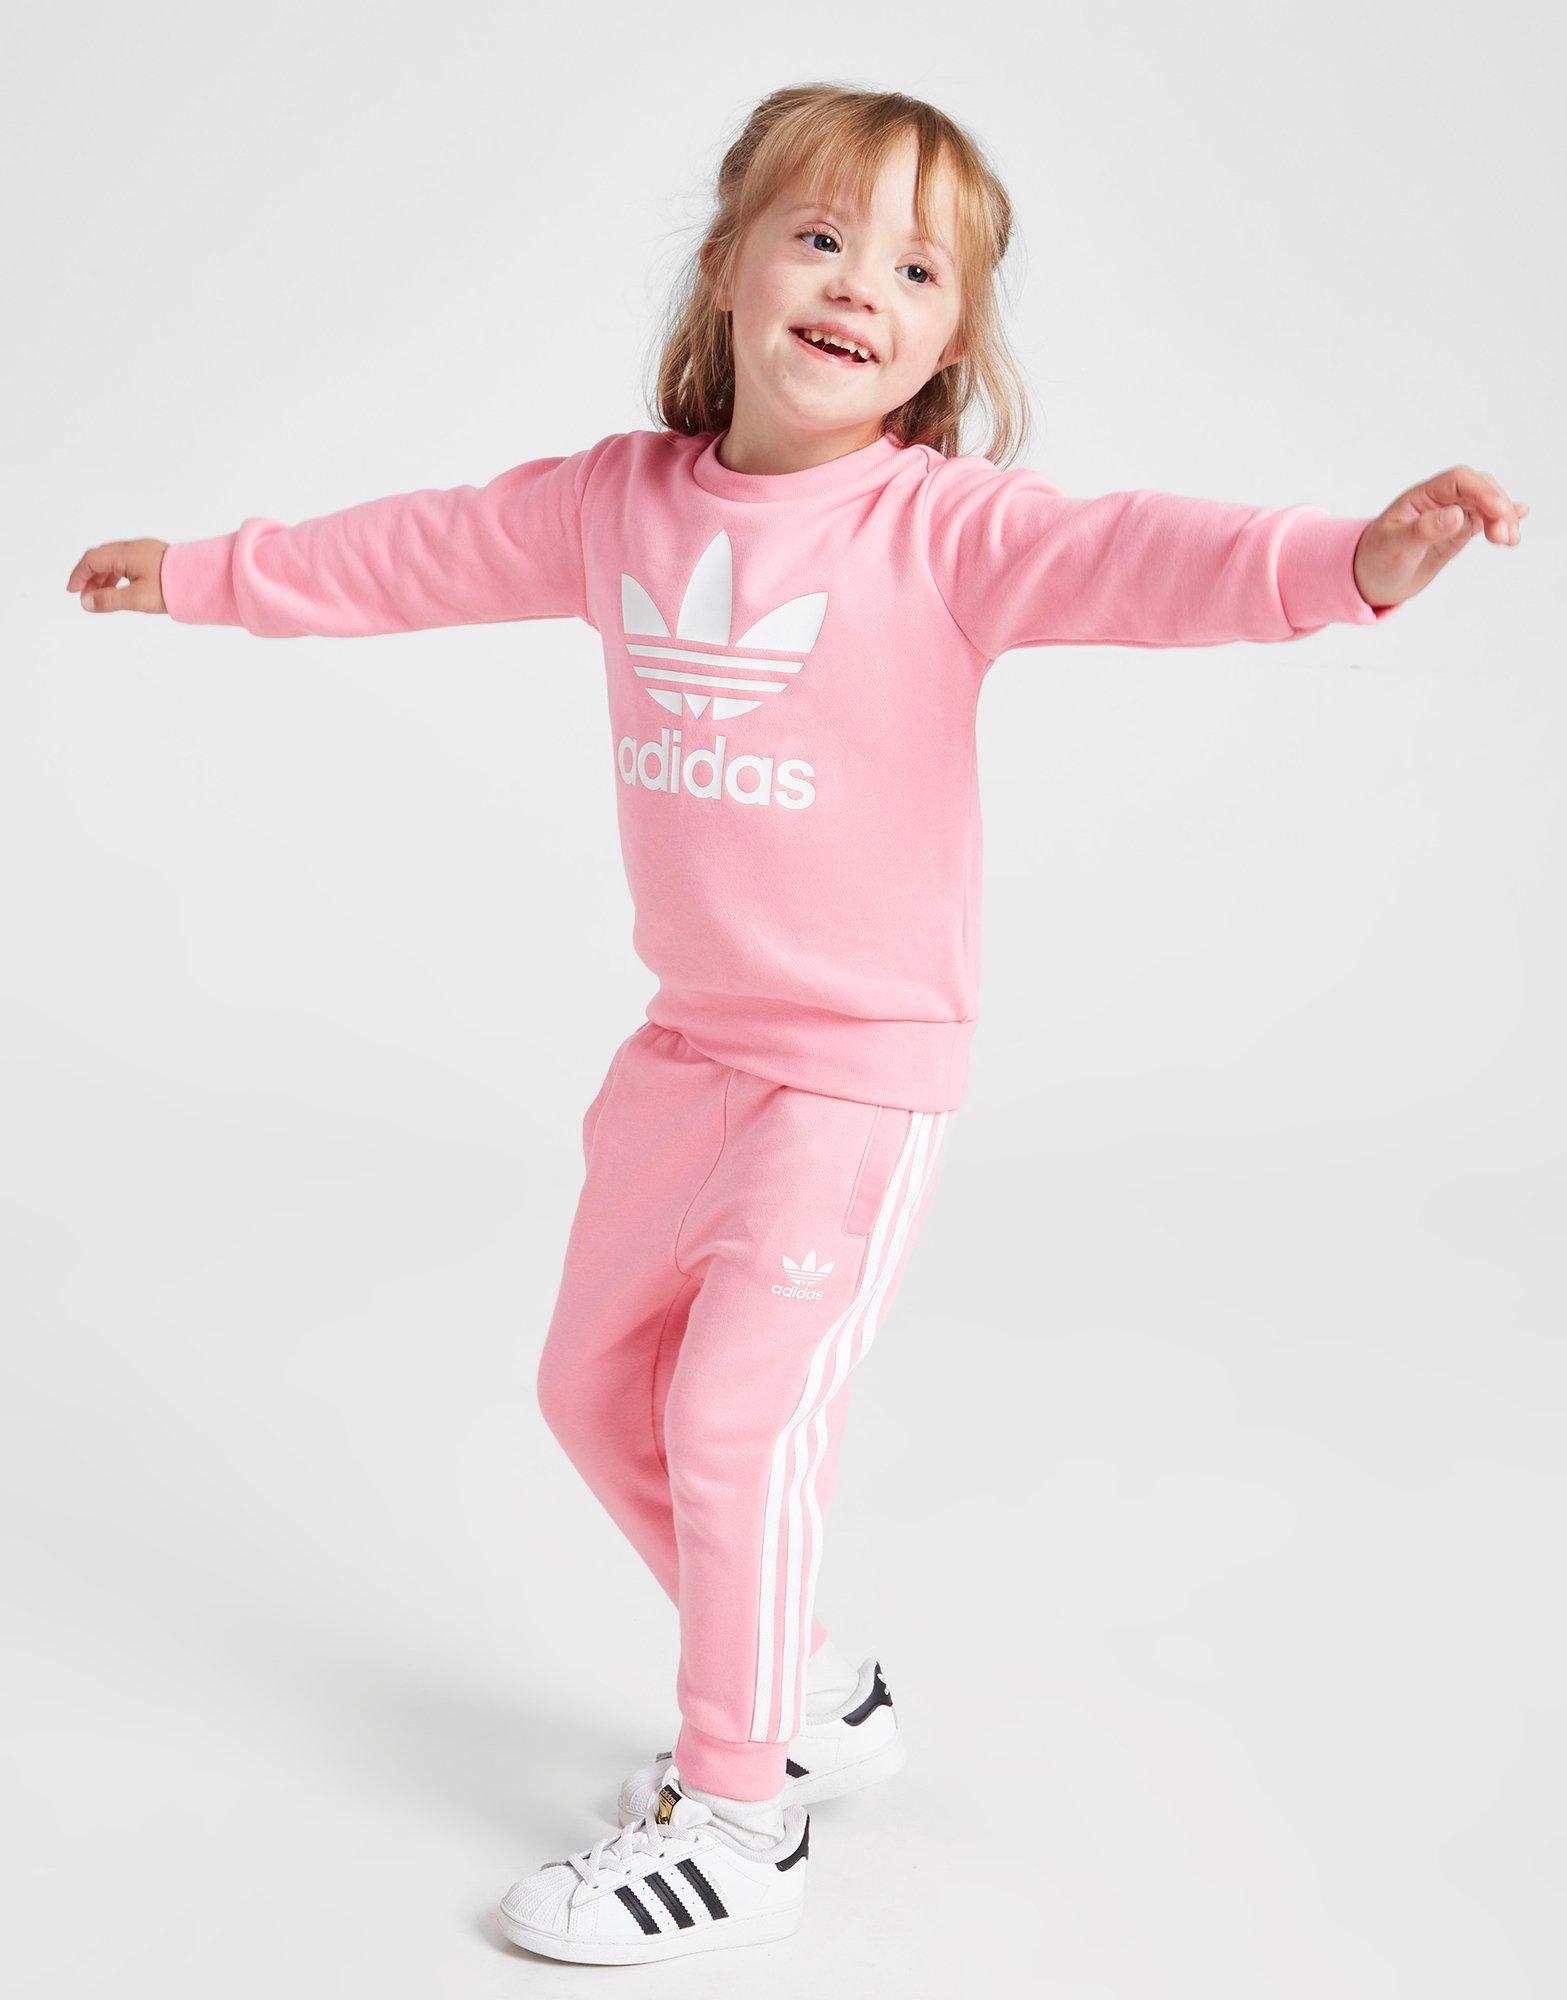 Adidas Track Pants Size 6 Months Baby Girl Pink